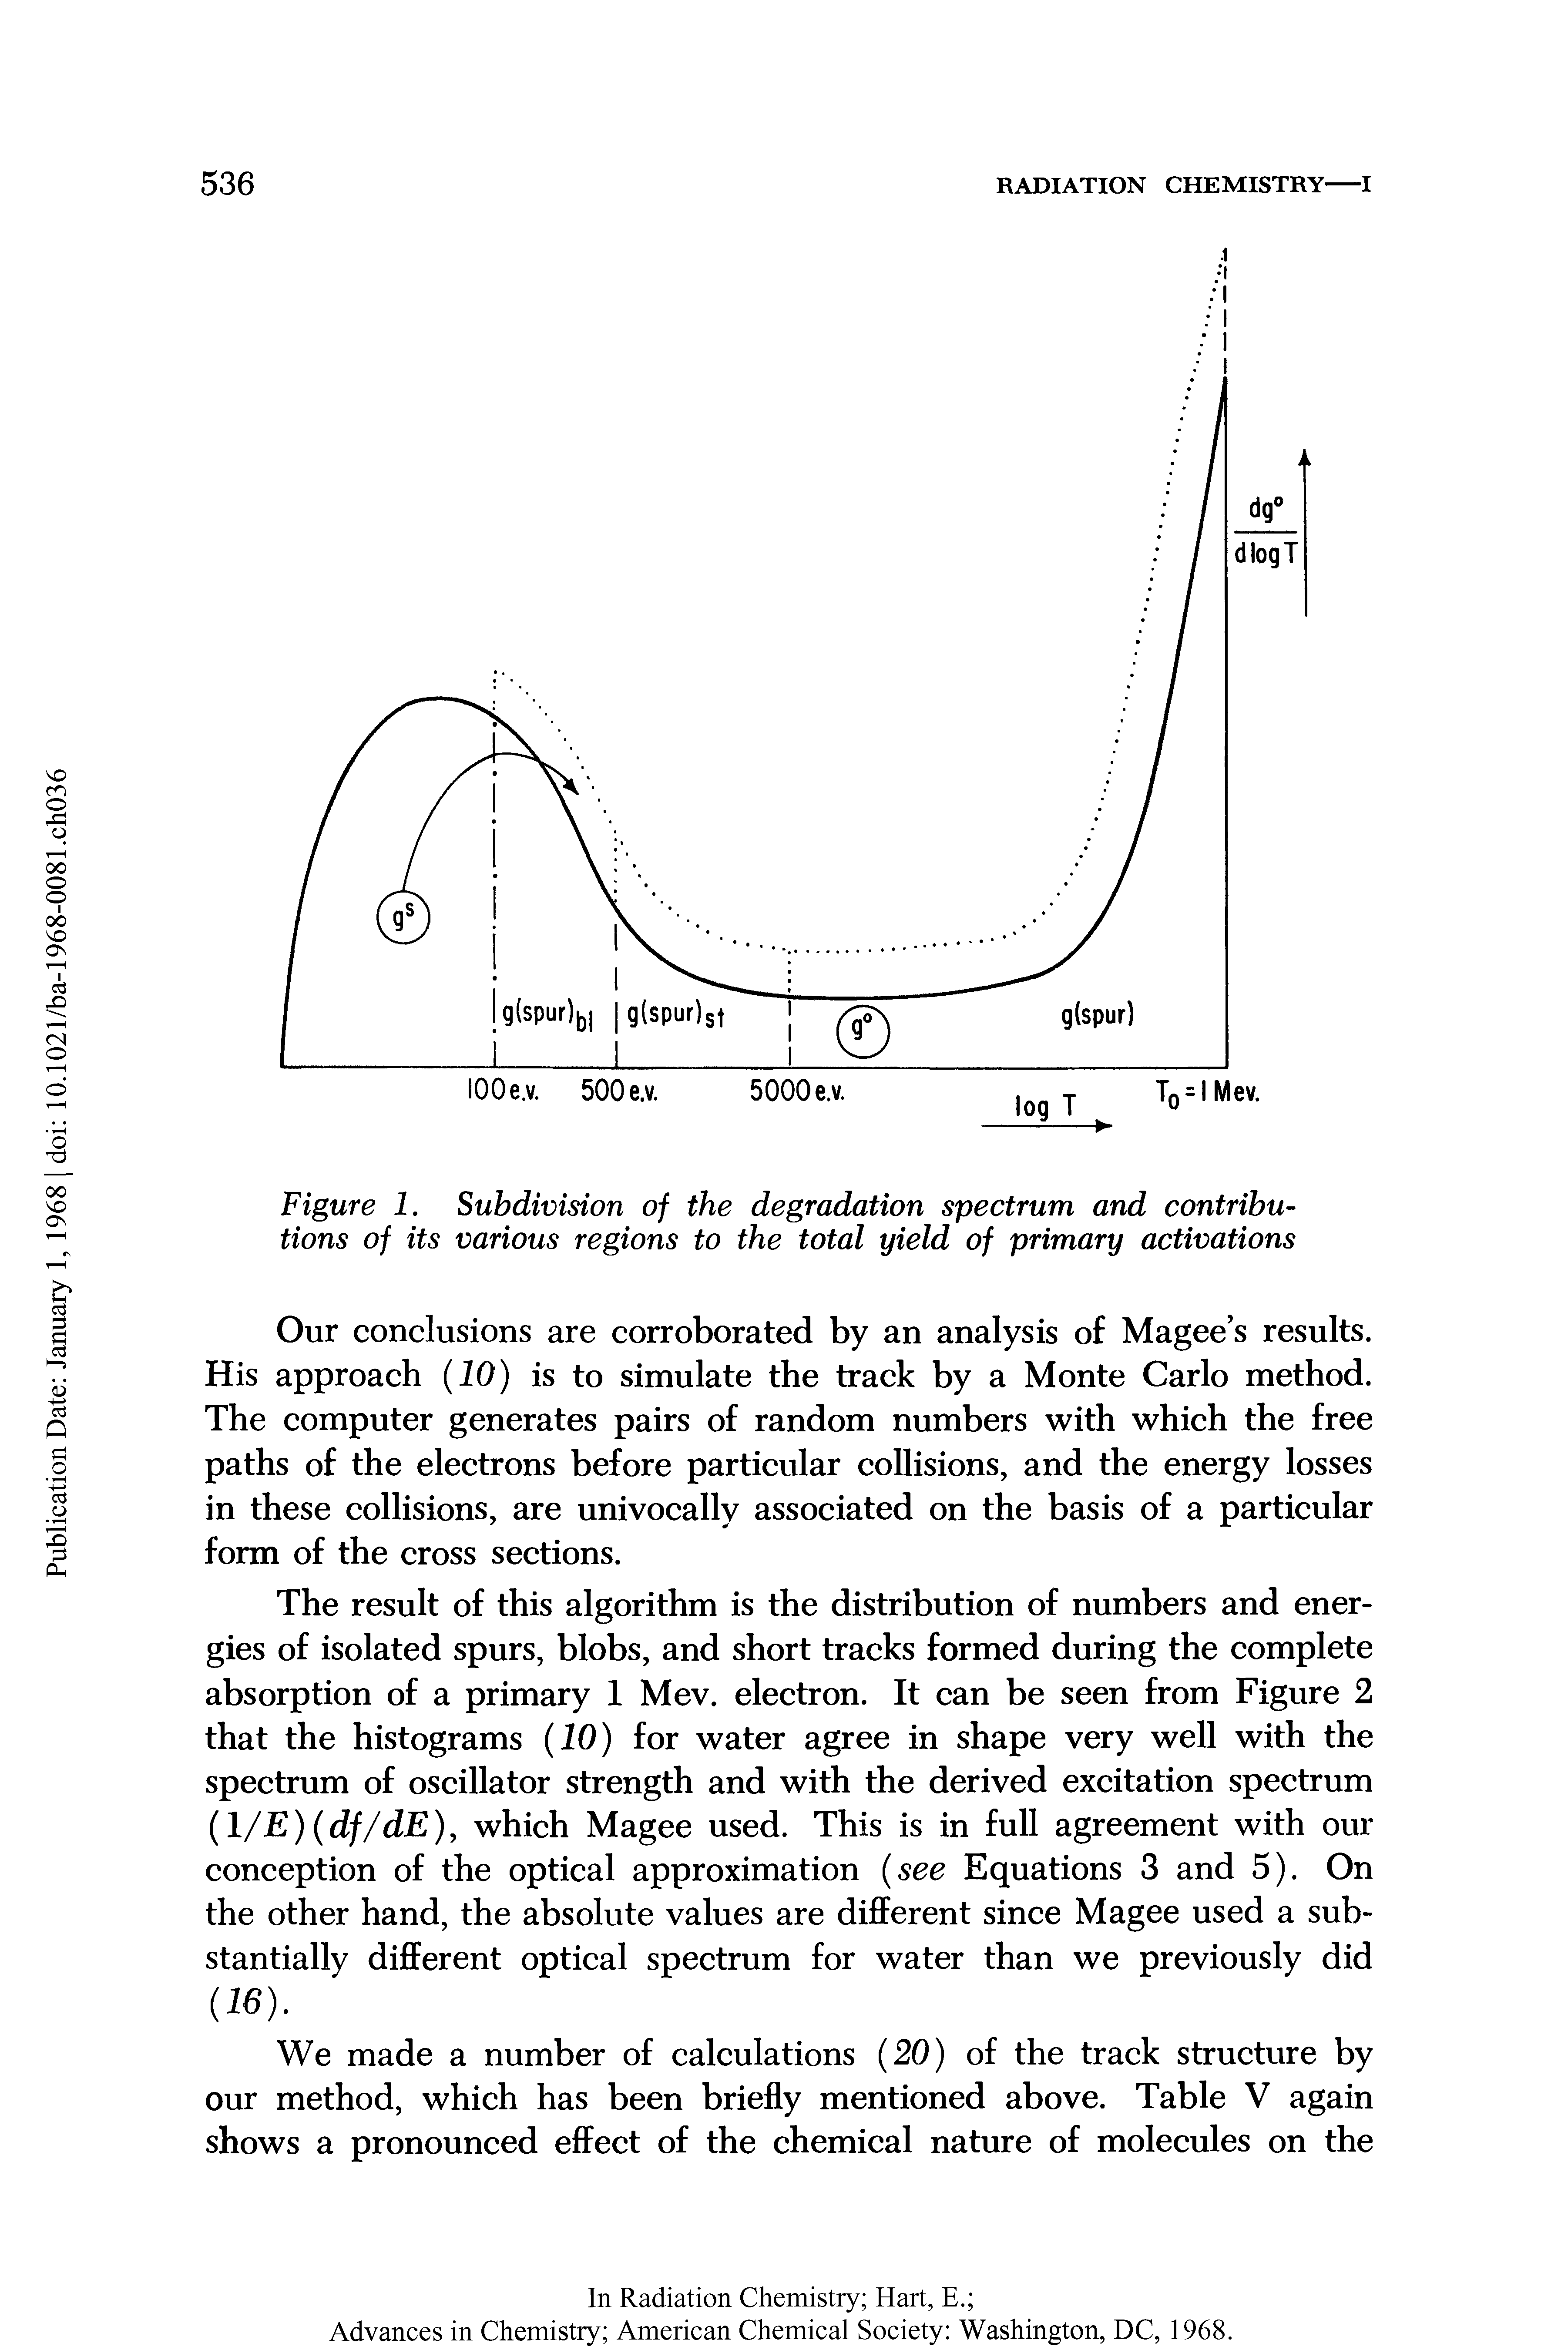 Figure 1. Subdivision of the degradation spectrum and contributions of its various regions to the total yield of primary activations...